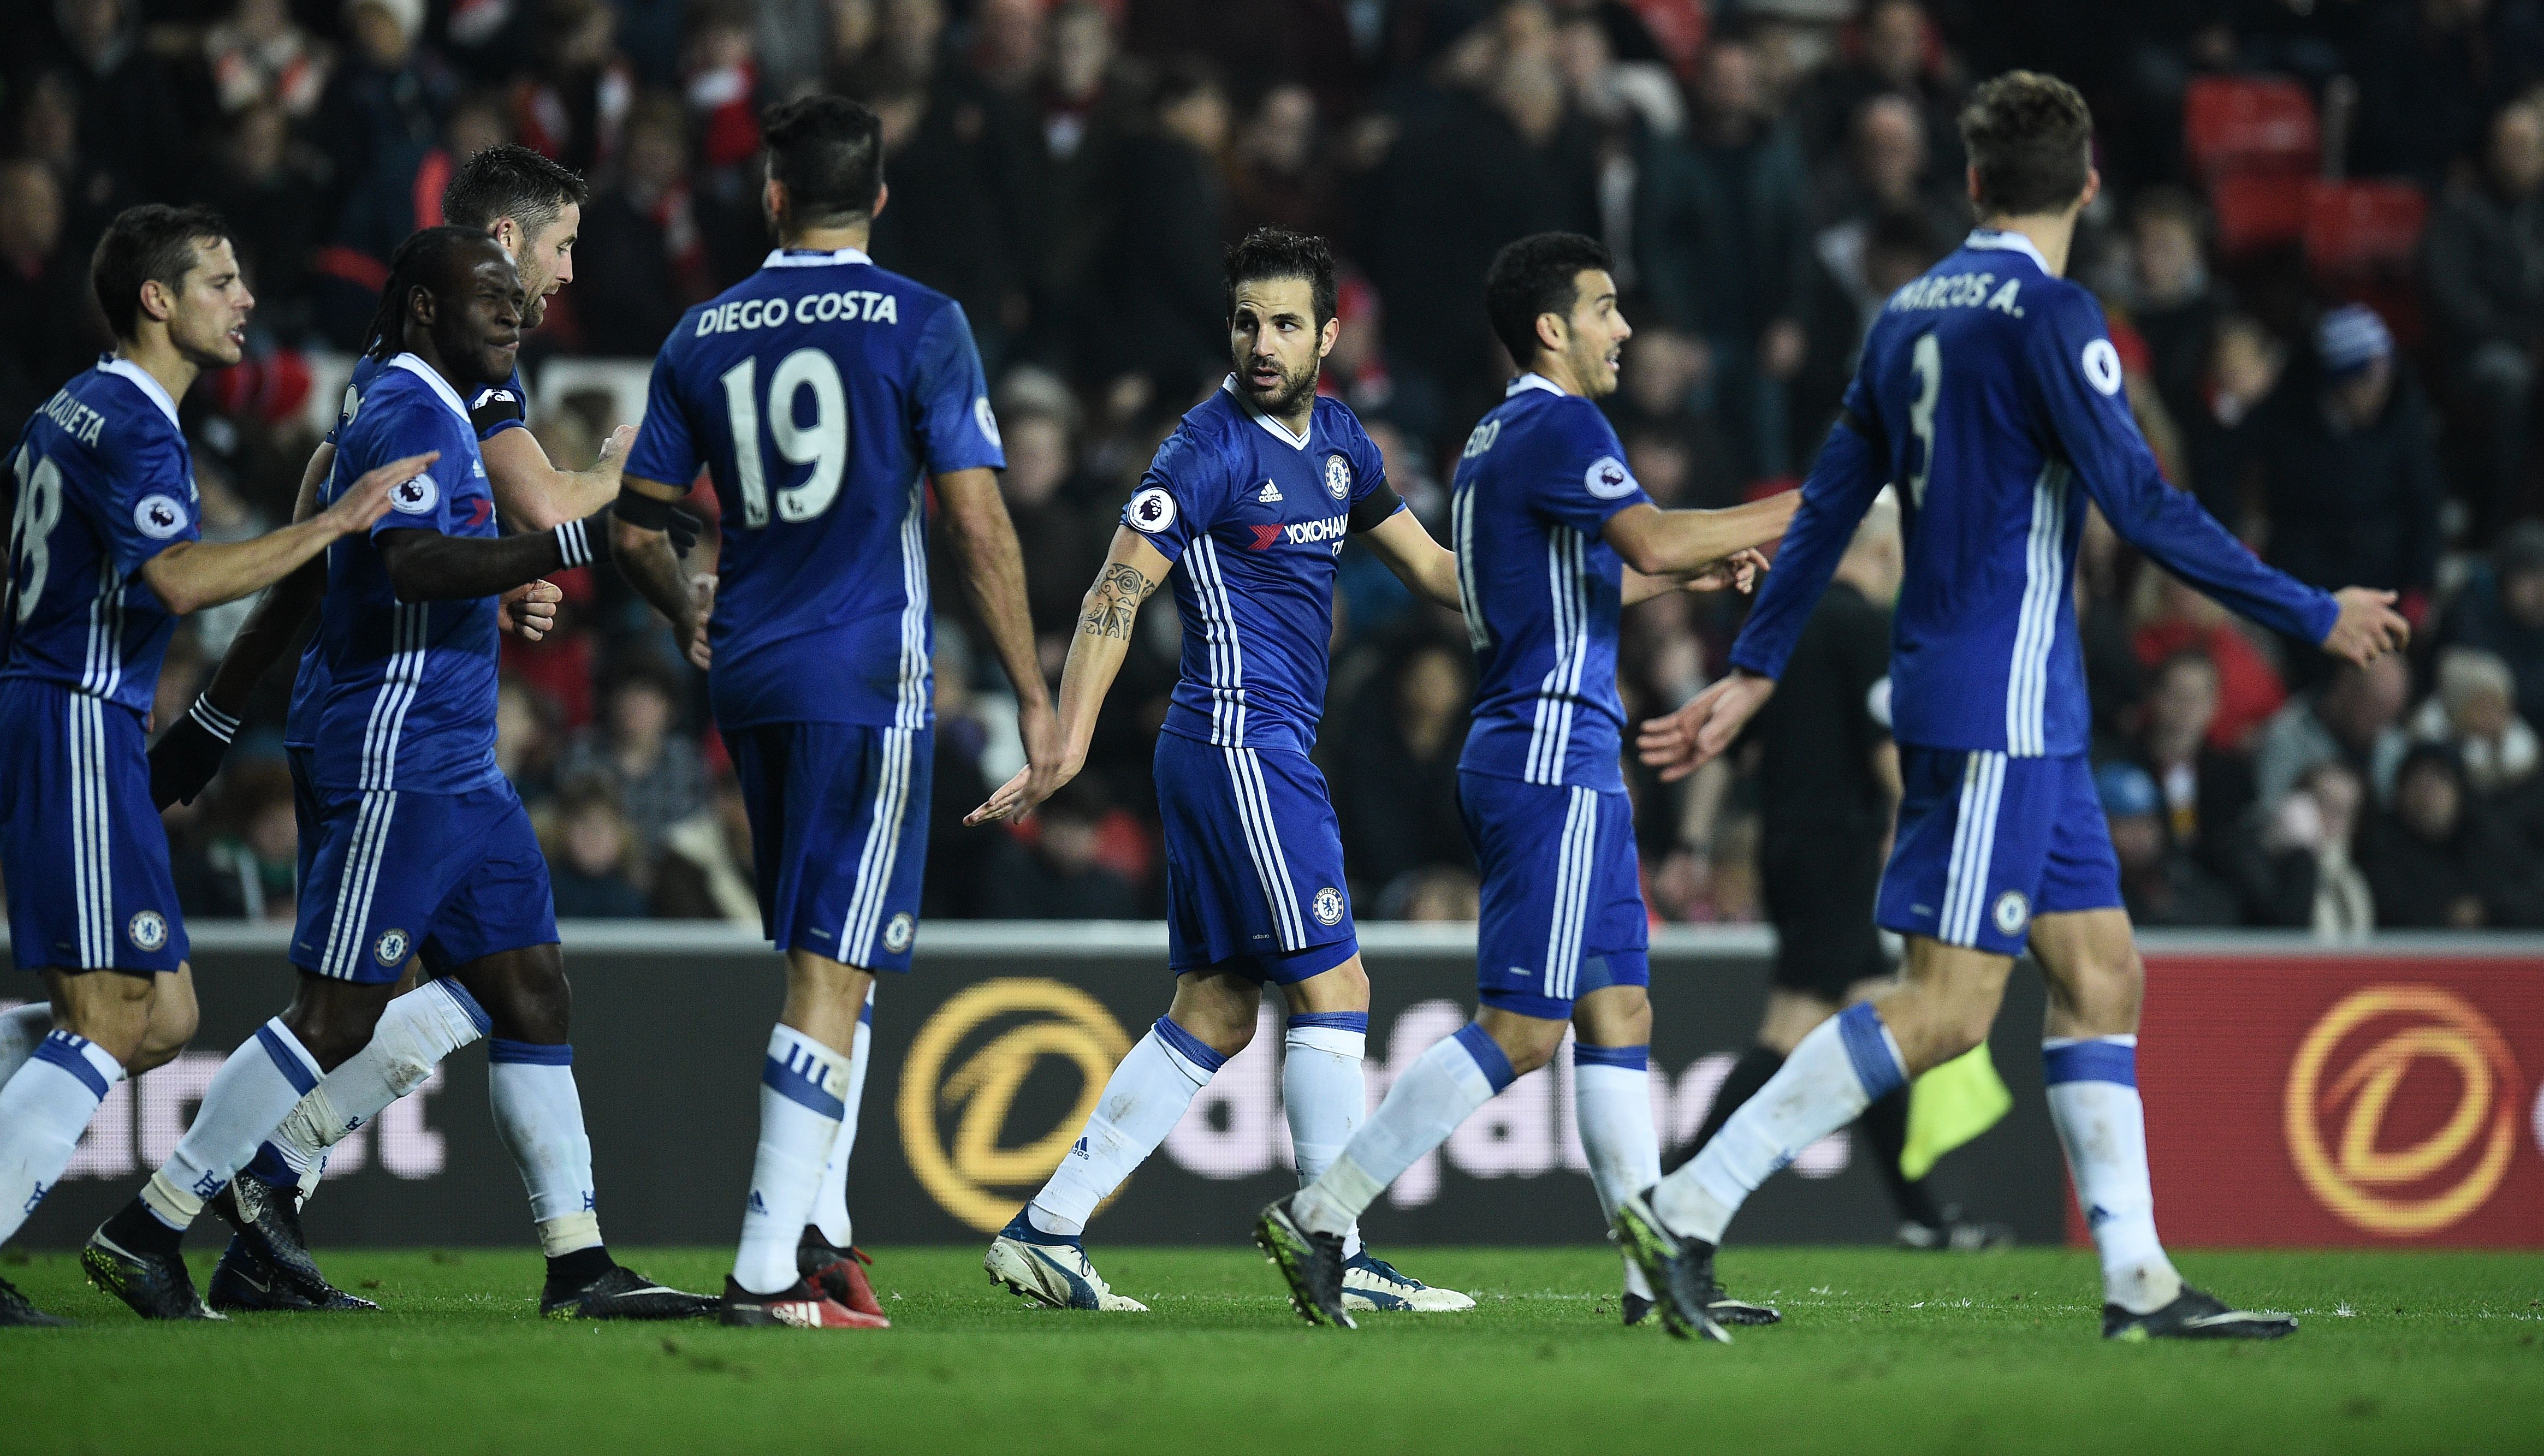 Chelsea's Spanish midfielder Cesc Fabrega (C) celebrates scoring his team's first goal during the English Premier League football match between Sunderland and Chelsea at the Stadium of Light in Sunderland, north-east England on December 14, 2016. / AFP / Oli SCARFF / RESTRICTED TO EDITORIAL USE. No use with unauthorized audio, video, data, fixture lists, club/league logos or 'live' services. Online in-match use limited to 75 images, no video emulation. No use in betting, games or single club/league/player publications.  /         (Photo credit should read OLI SCARFF/AFP/Getty Images)